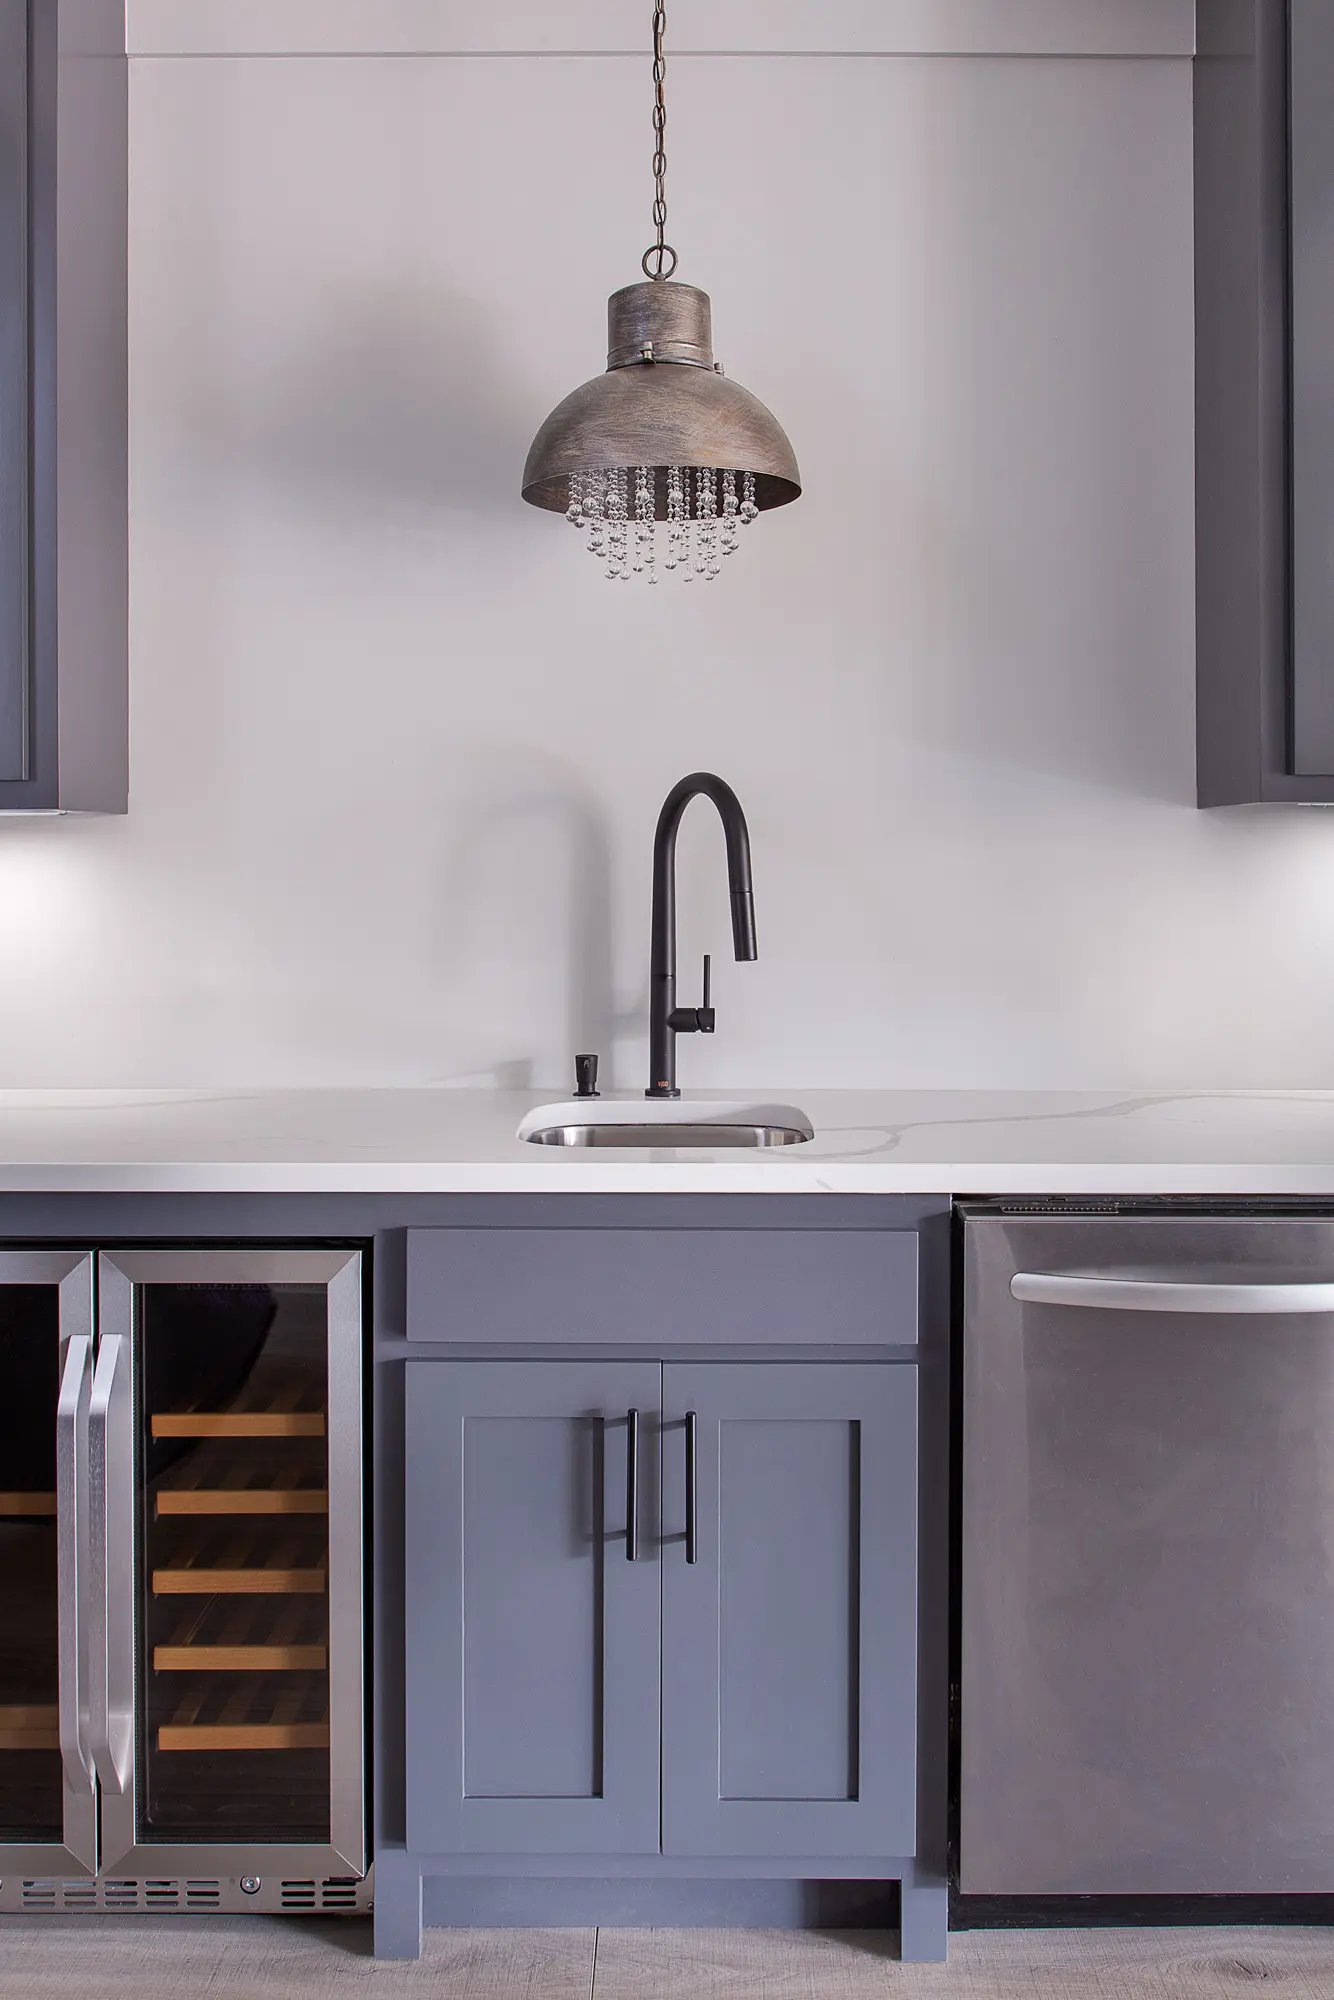 Elegant kitchen wet bar with gray cabinetry, white countertop, undermount sink, black faucet, and industrial pendant light.